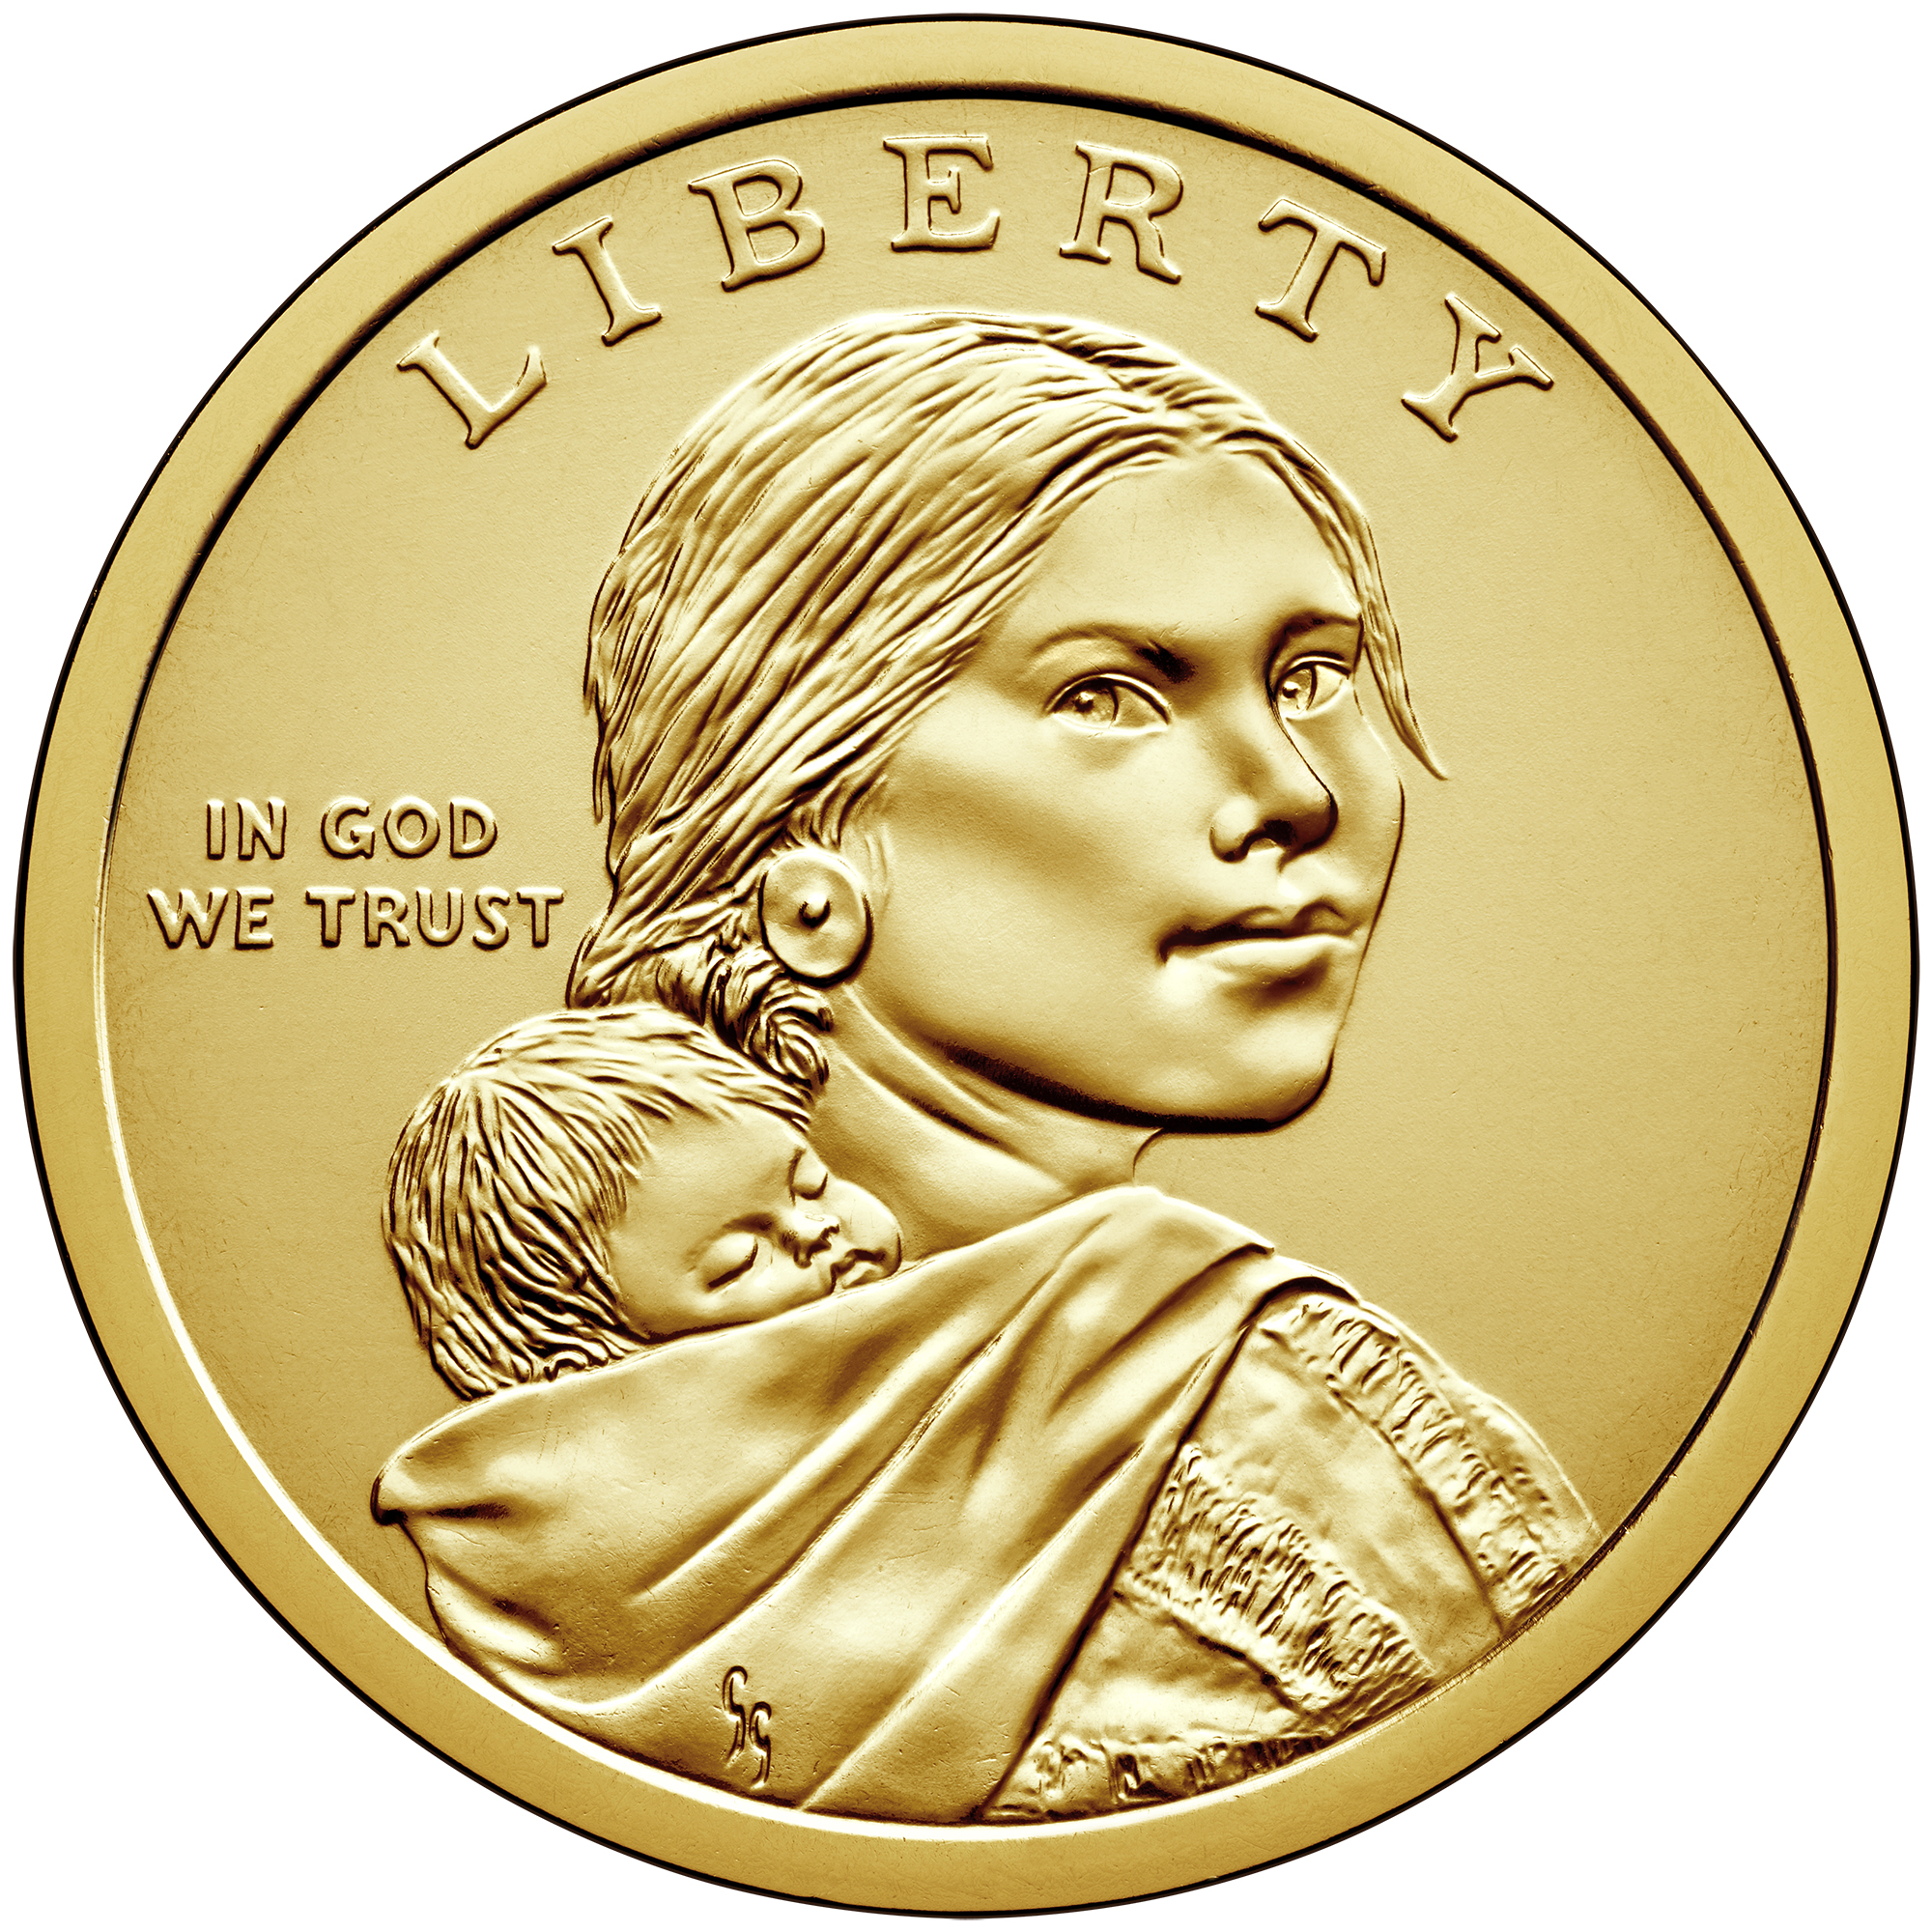 2018-native-american-one-dollar-uncirculated-coin-obverse.jpg